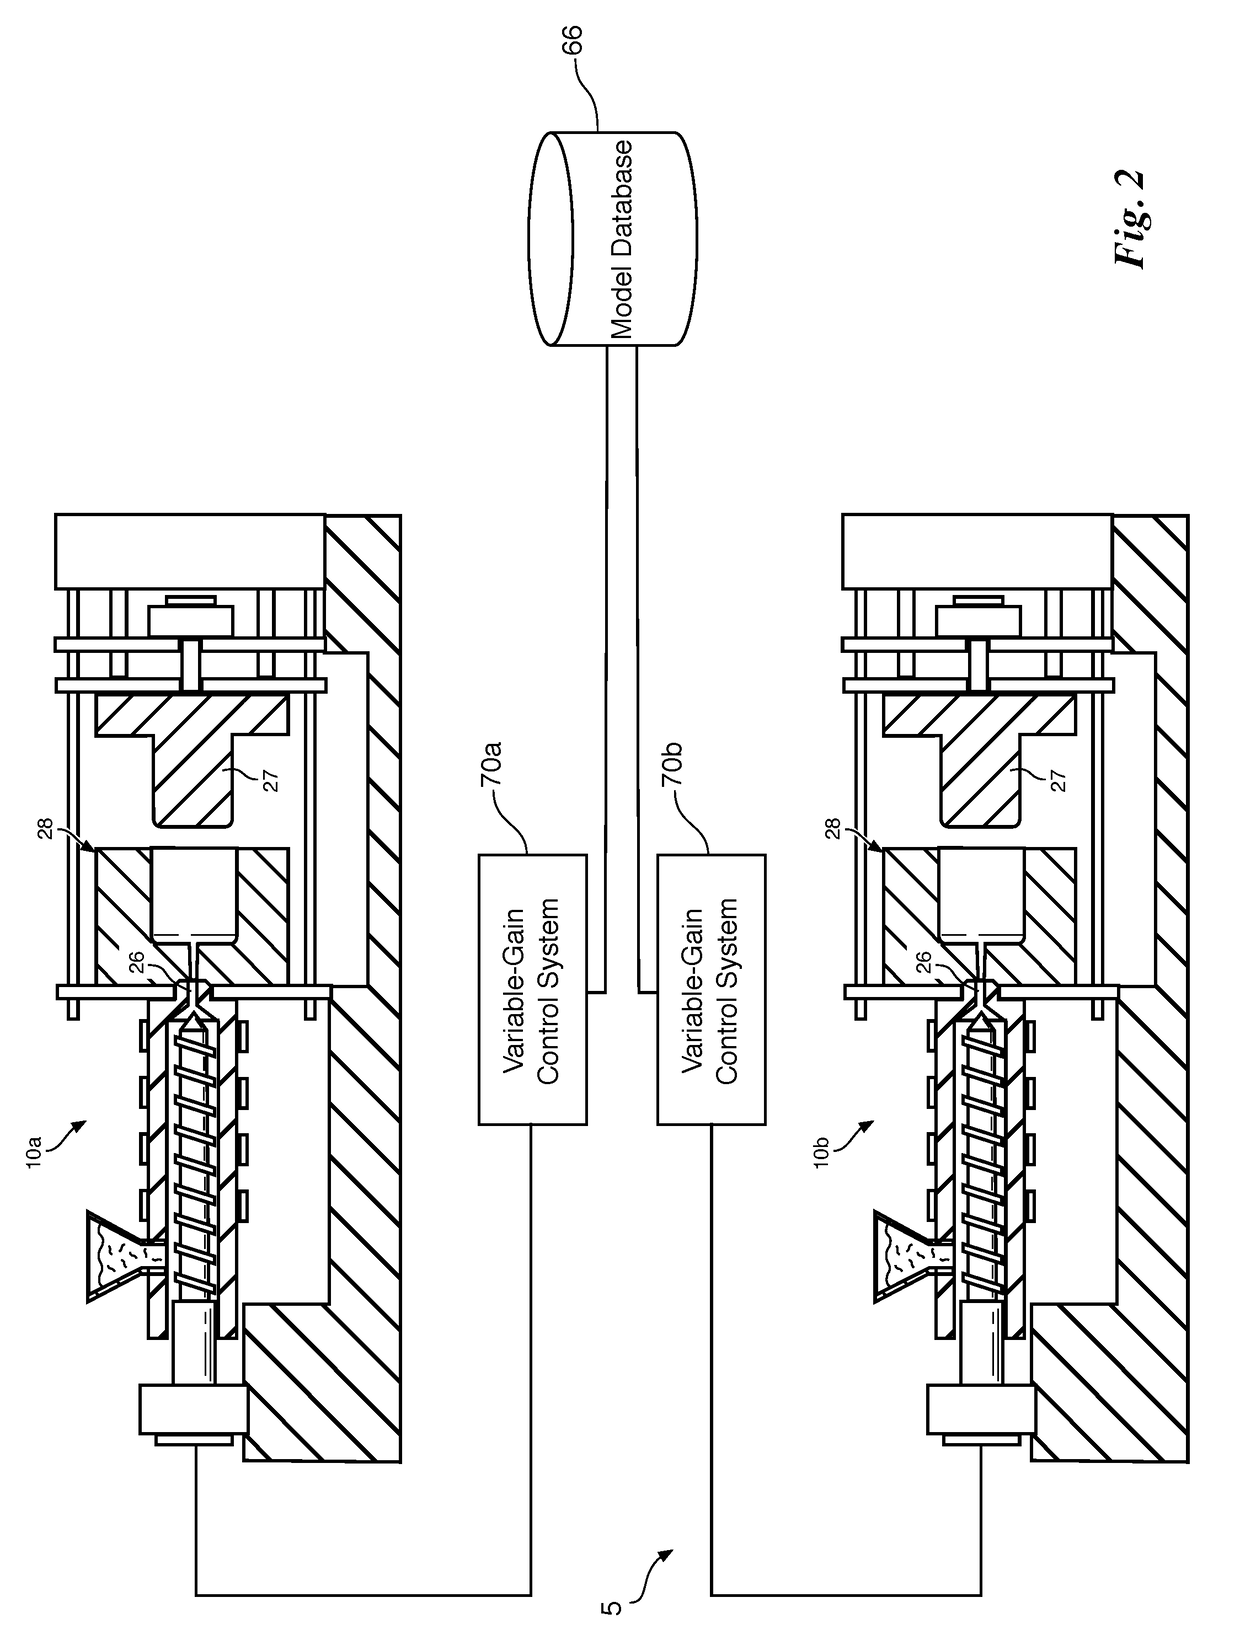 Systems and methods for autotuning PID control of injection molding machines